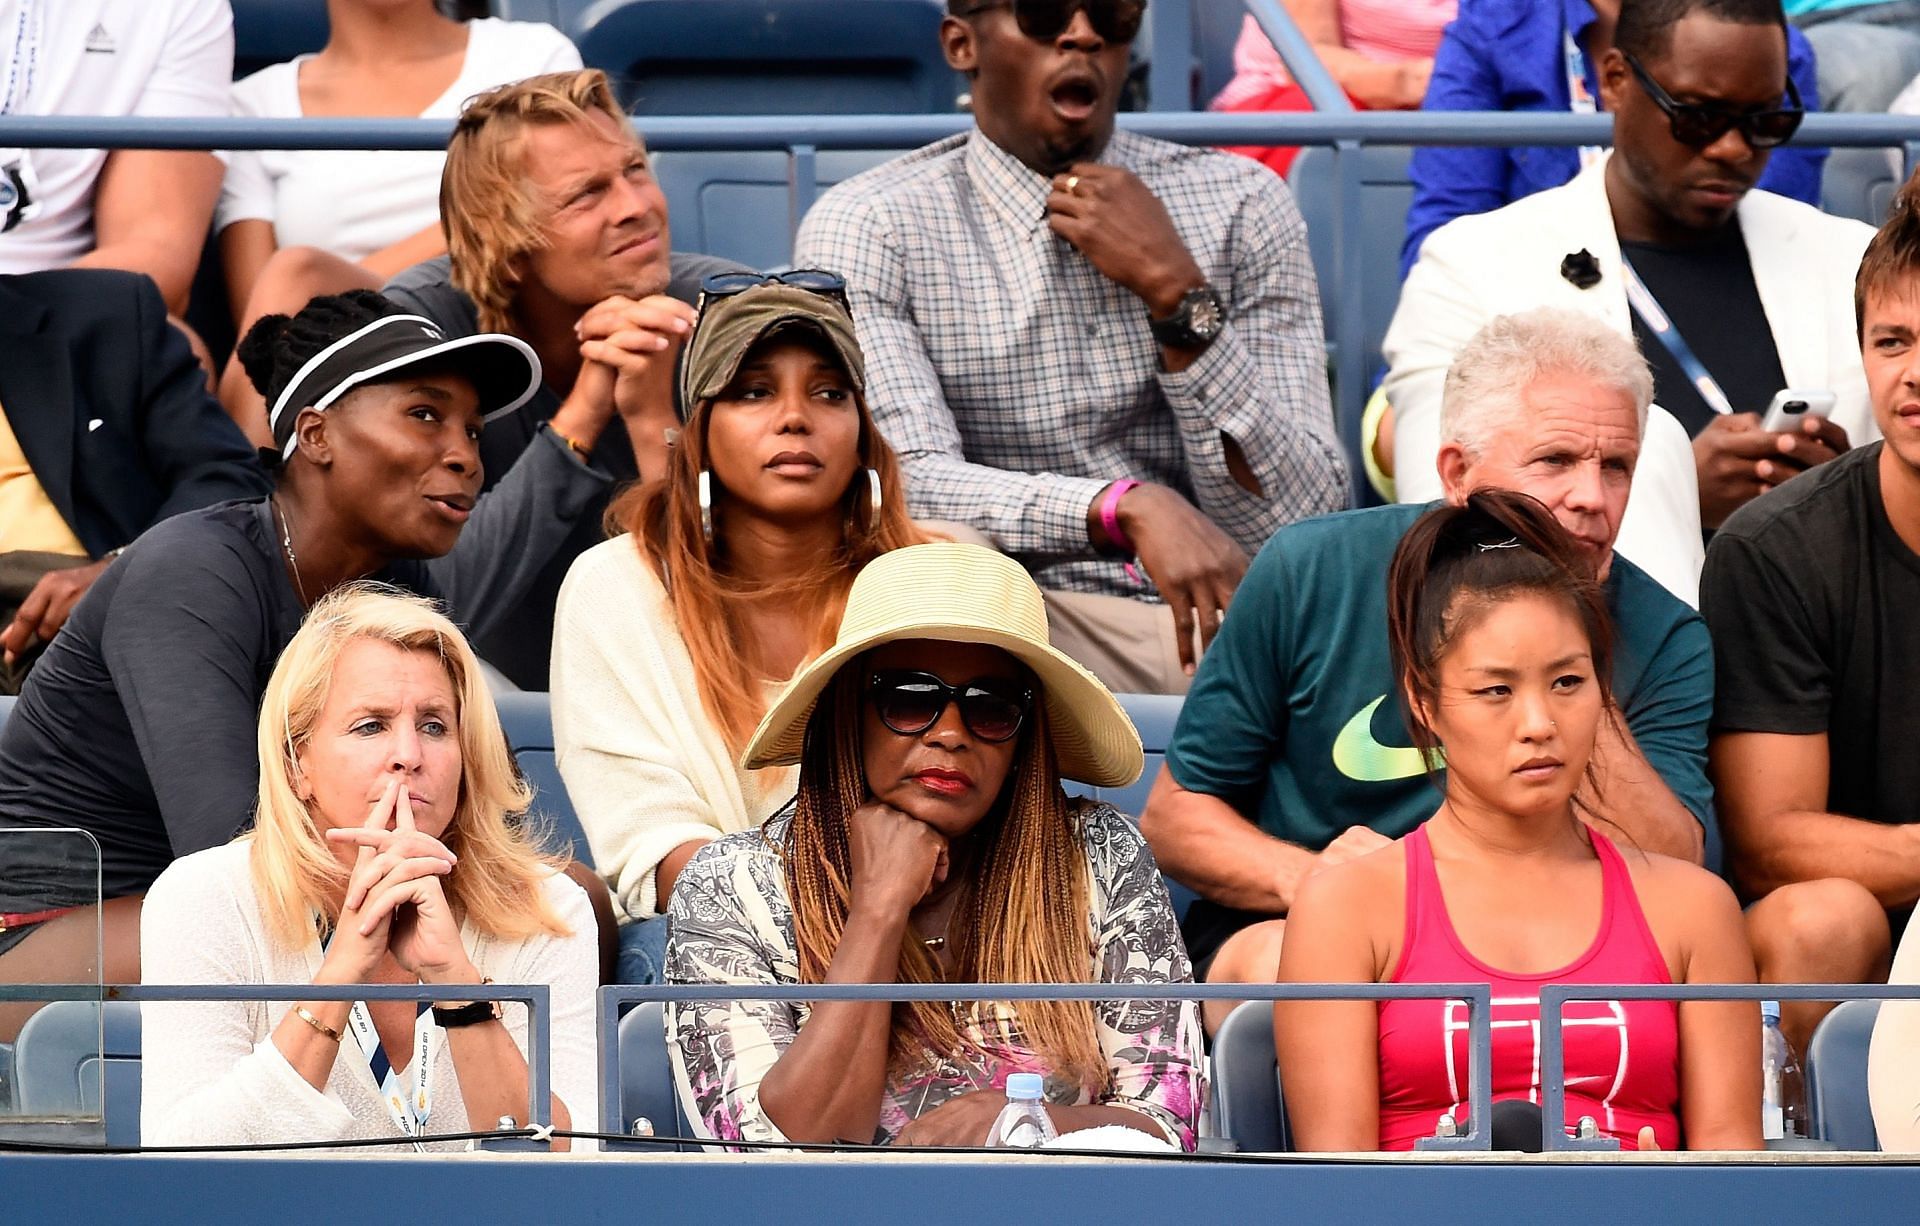 Venus Williams and mother Oracene Price at the 2014 US Open.